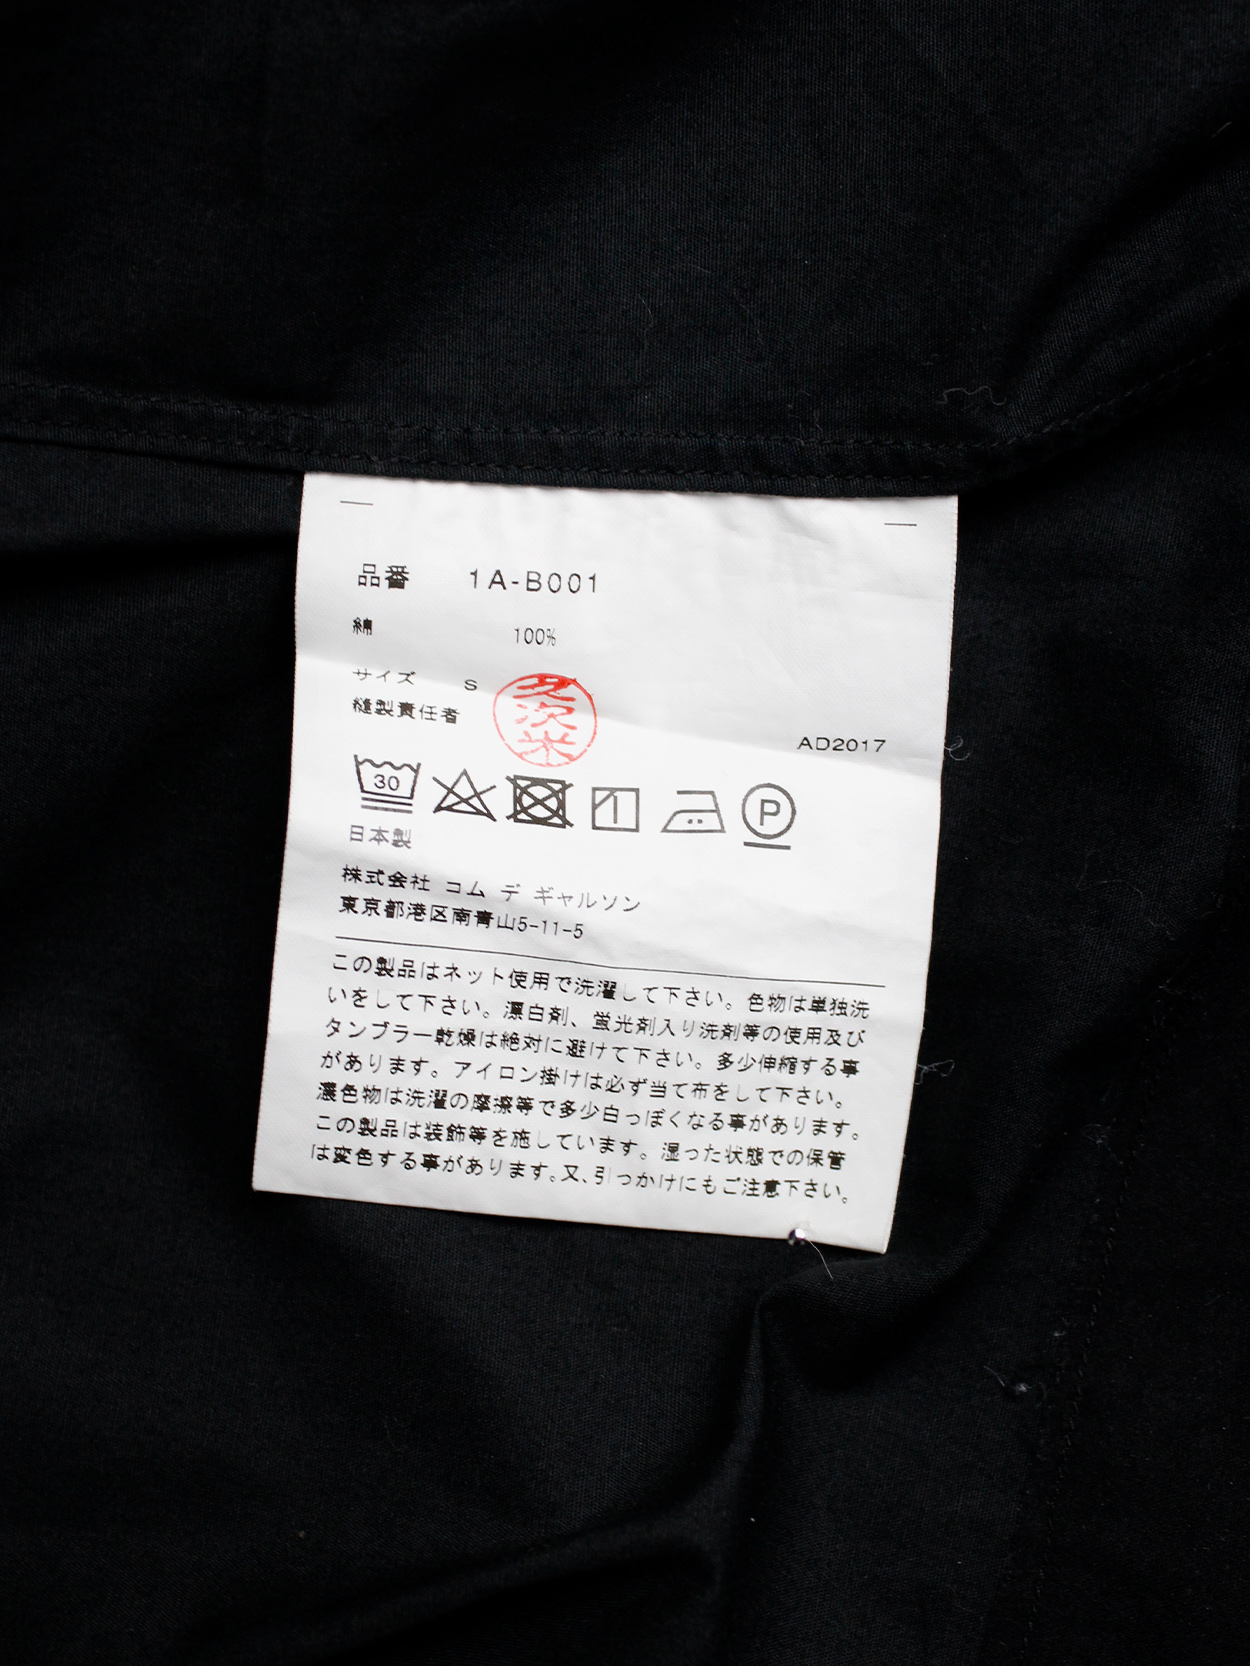 Comme des Garçons black shirt with rows of oversized silver eyelets ...